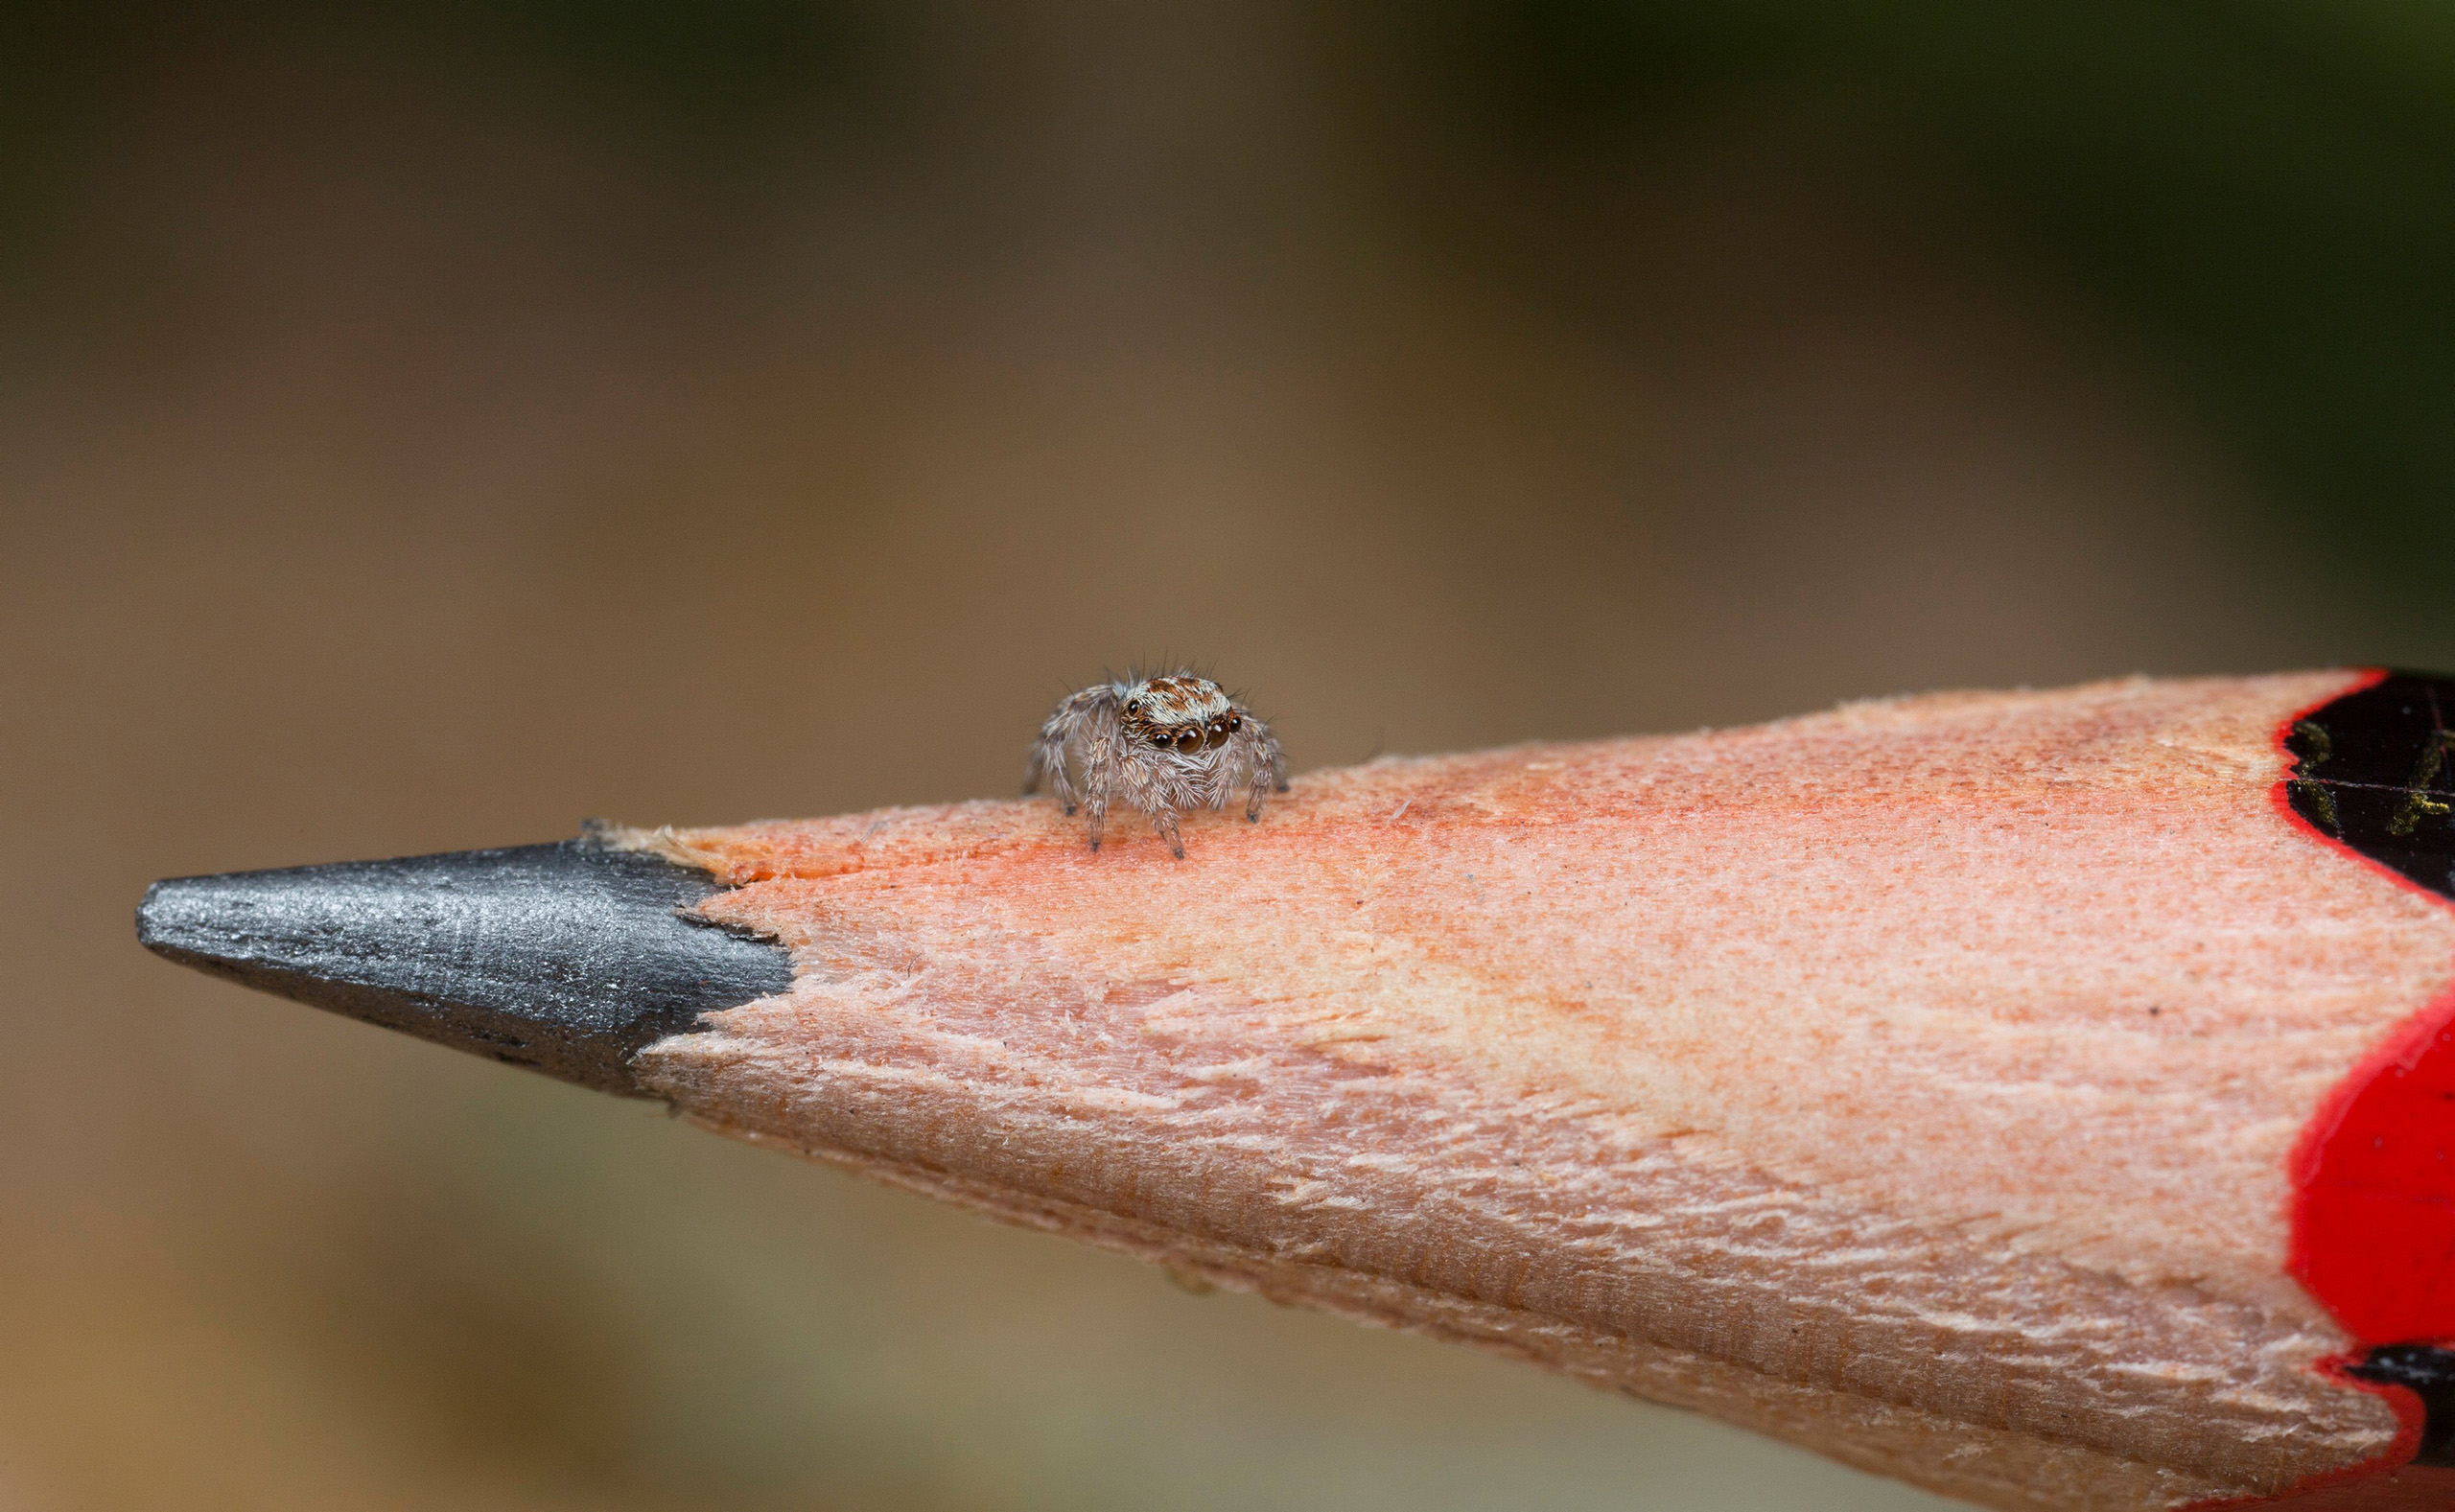 A juvenile specimen of the recently-discovered Australian Peacock spider, Maratus Albus, sits on the nib of a pencil in Western Australia's Nuytsland Nature Reserve.